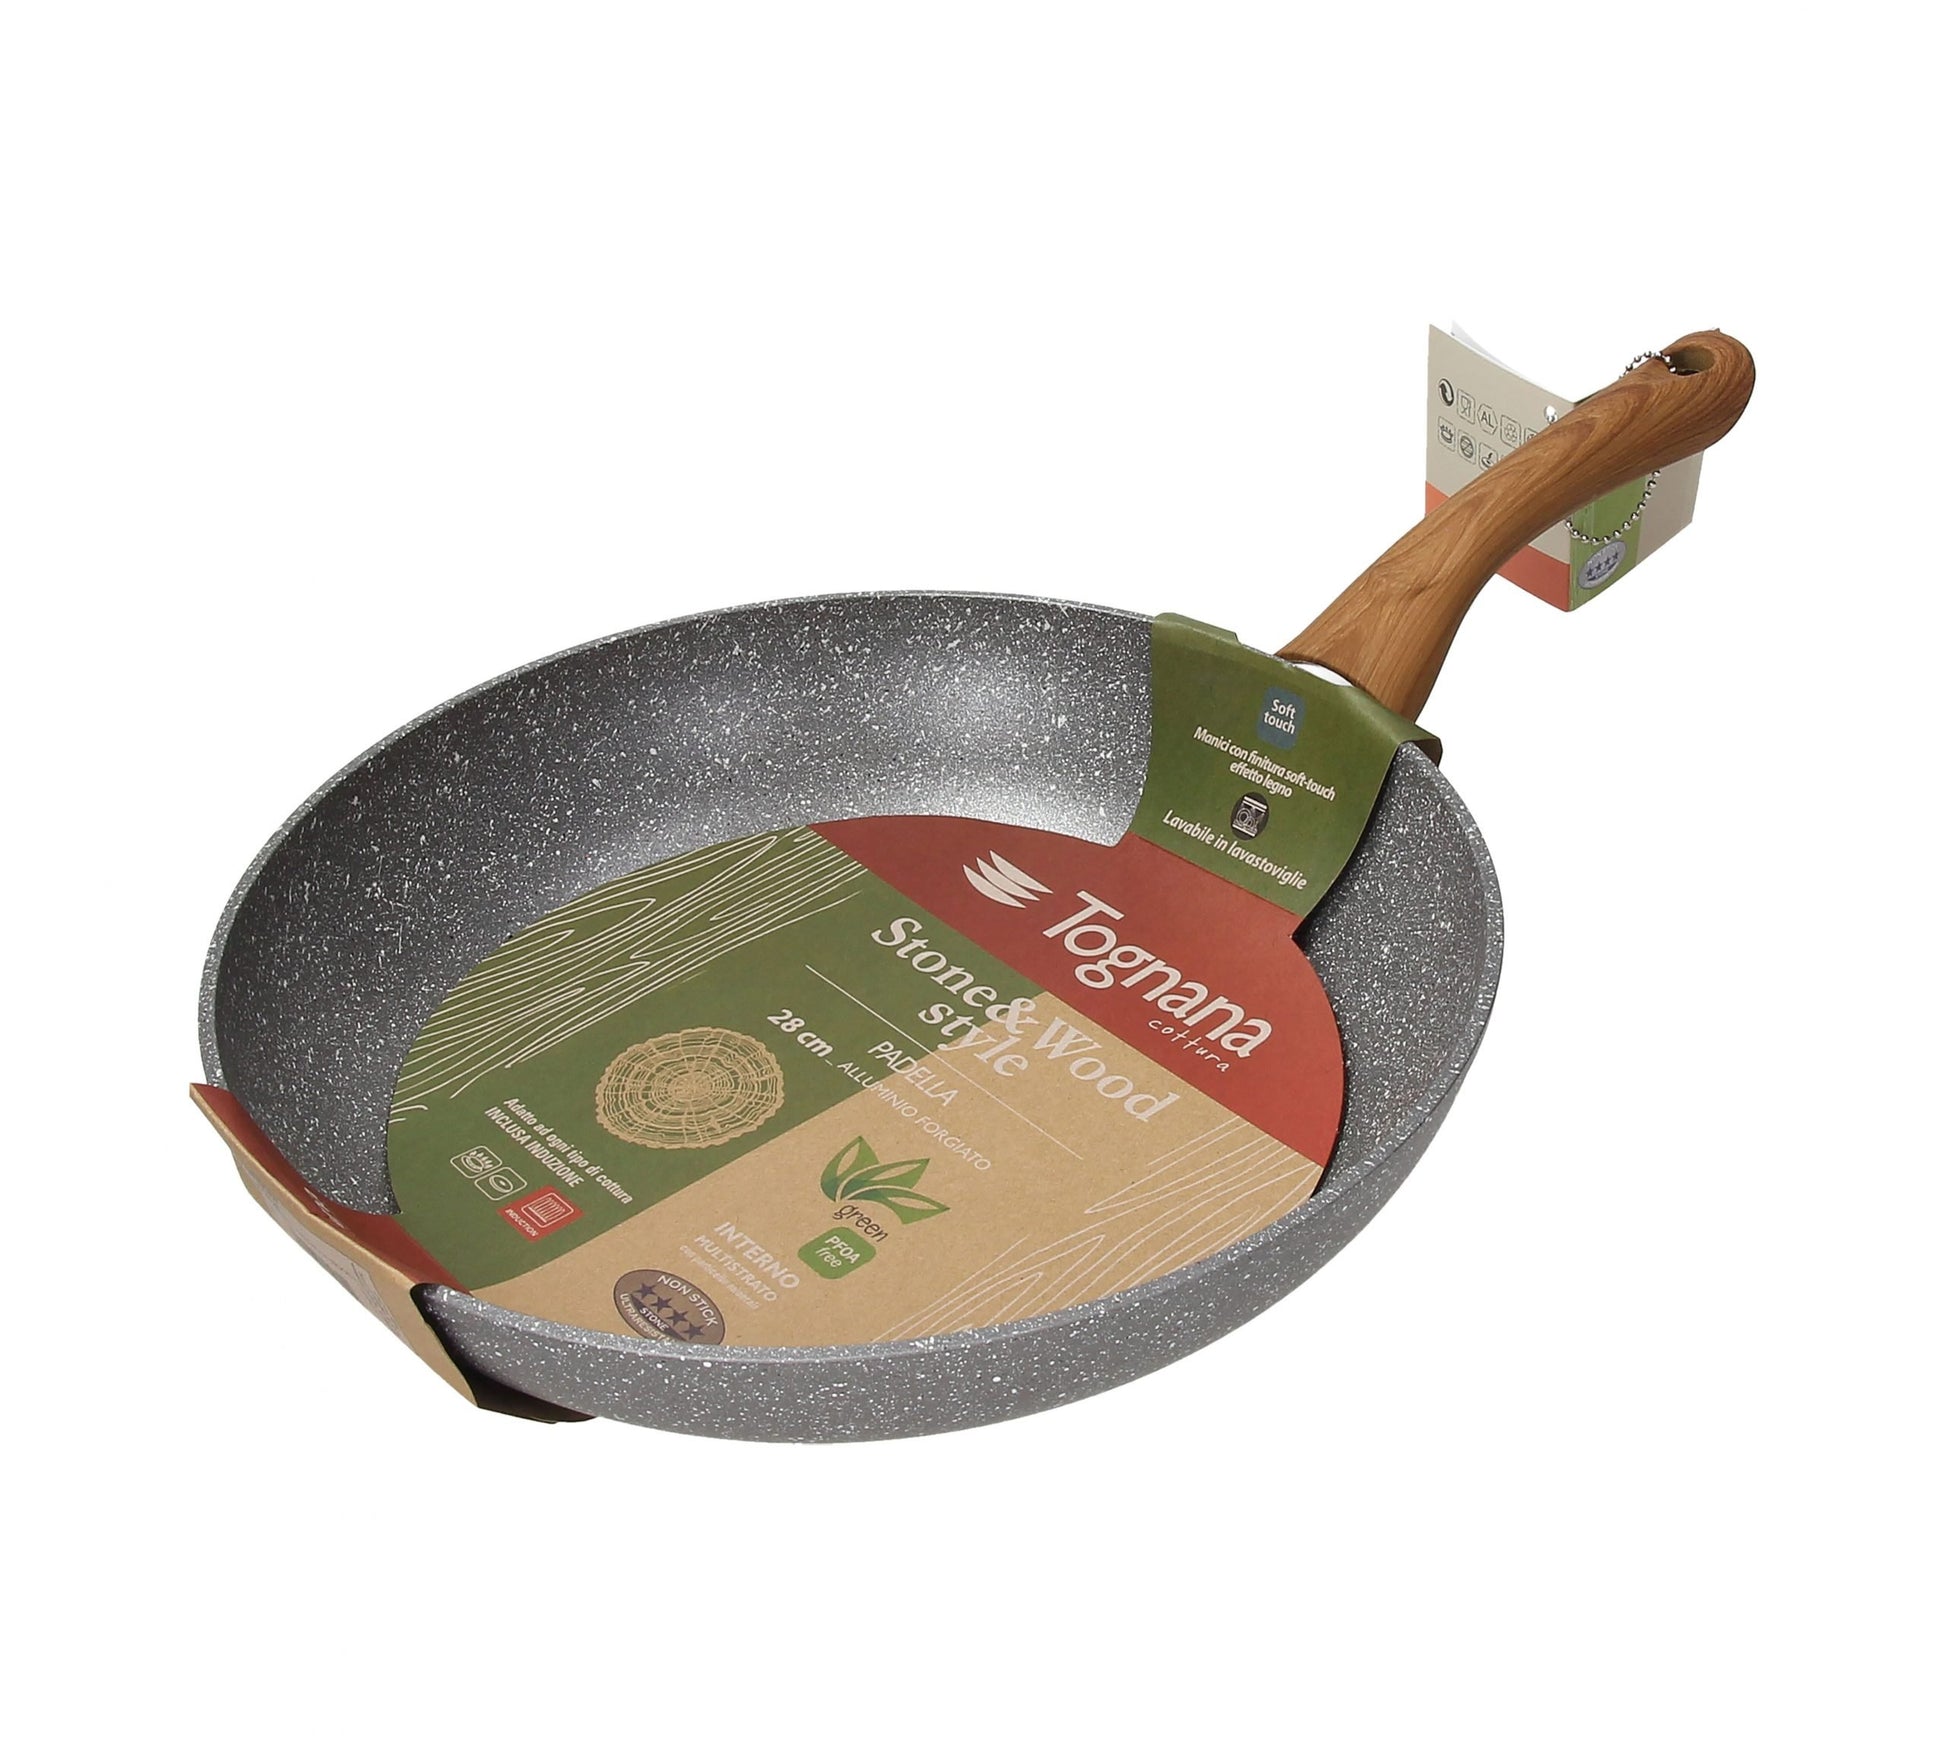 Wood & Stone Style Fry Pan 11 inch